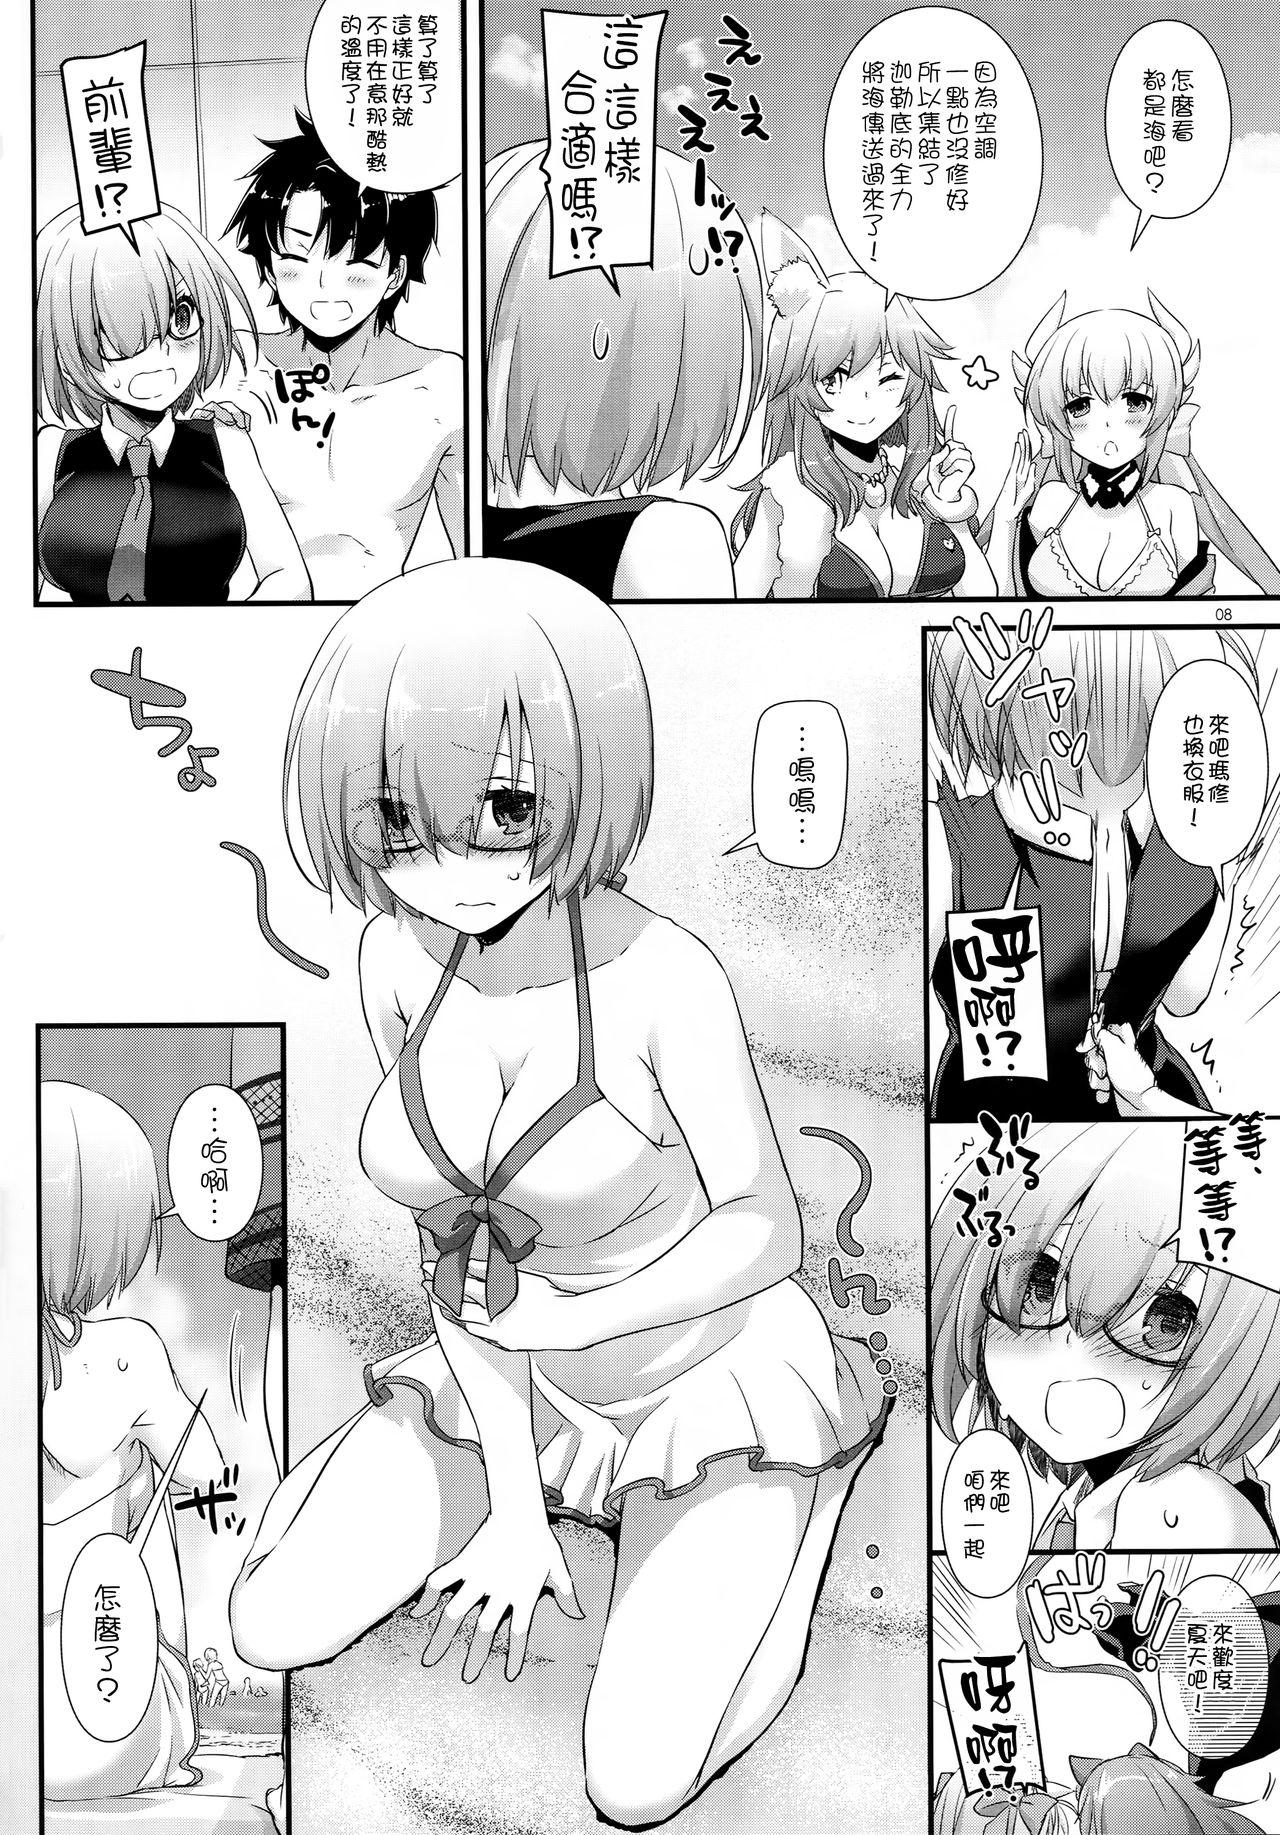 Celebrities D.L. action 116 - Fate grand order Humiliation - Page 8